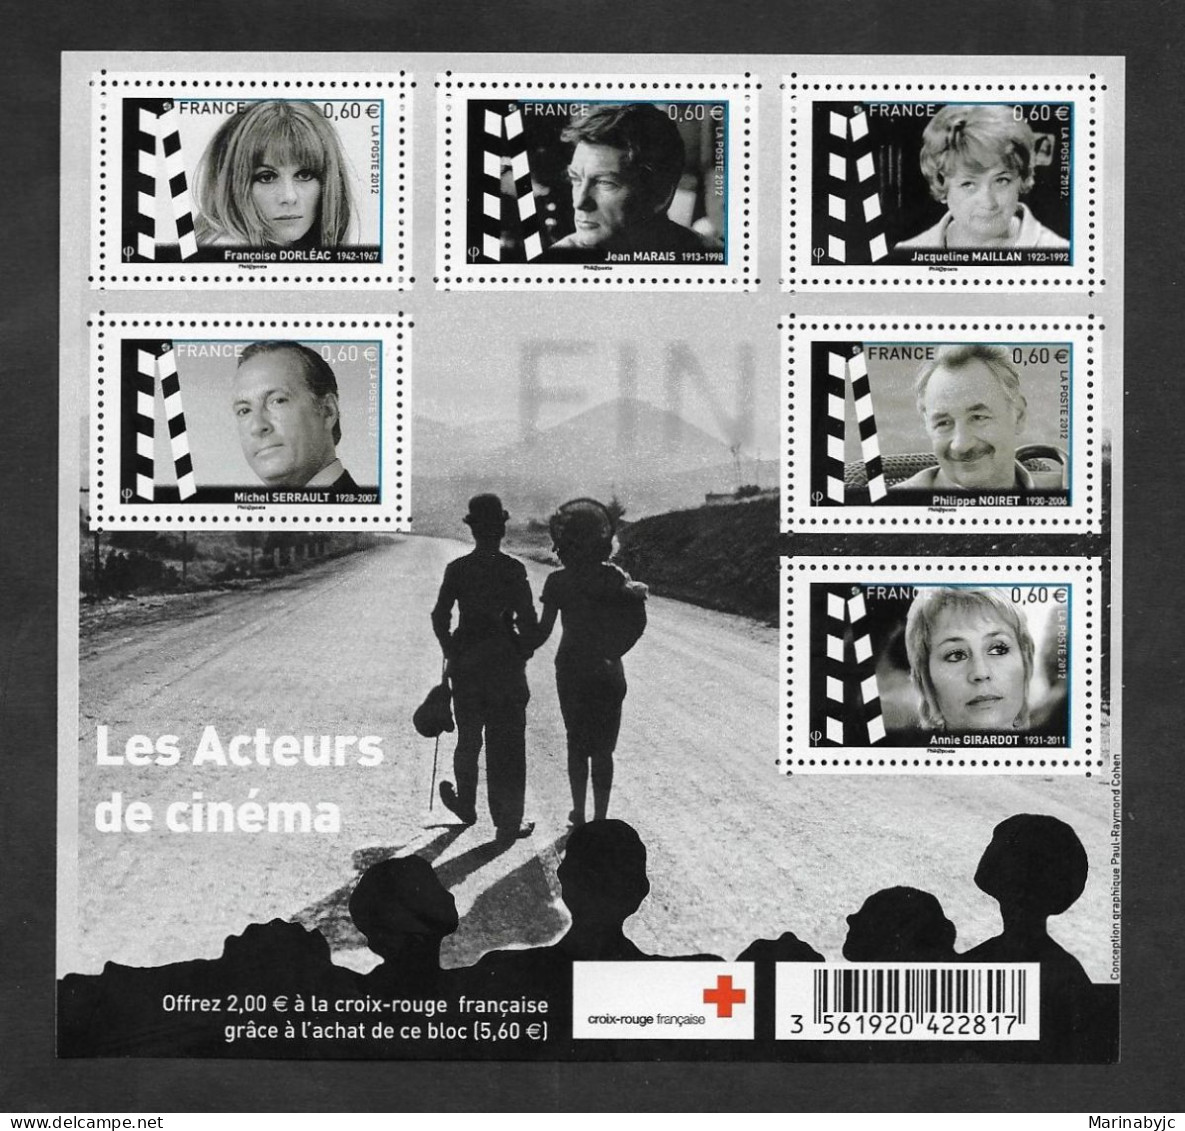 SE)2007 FRANCE, FROM THE RED CROSS SERIES, FILM ACTORS, SS, MNH - 2004-2008 Marianne (Lamouche)